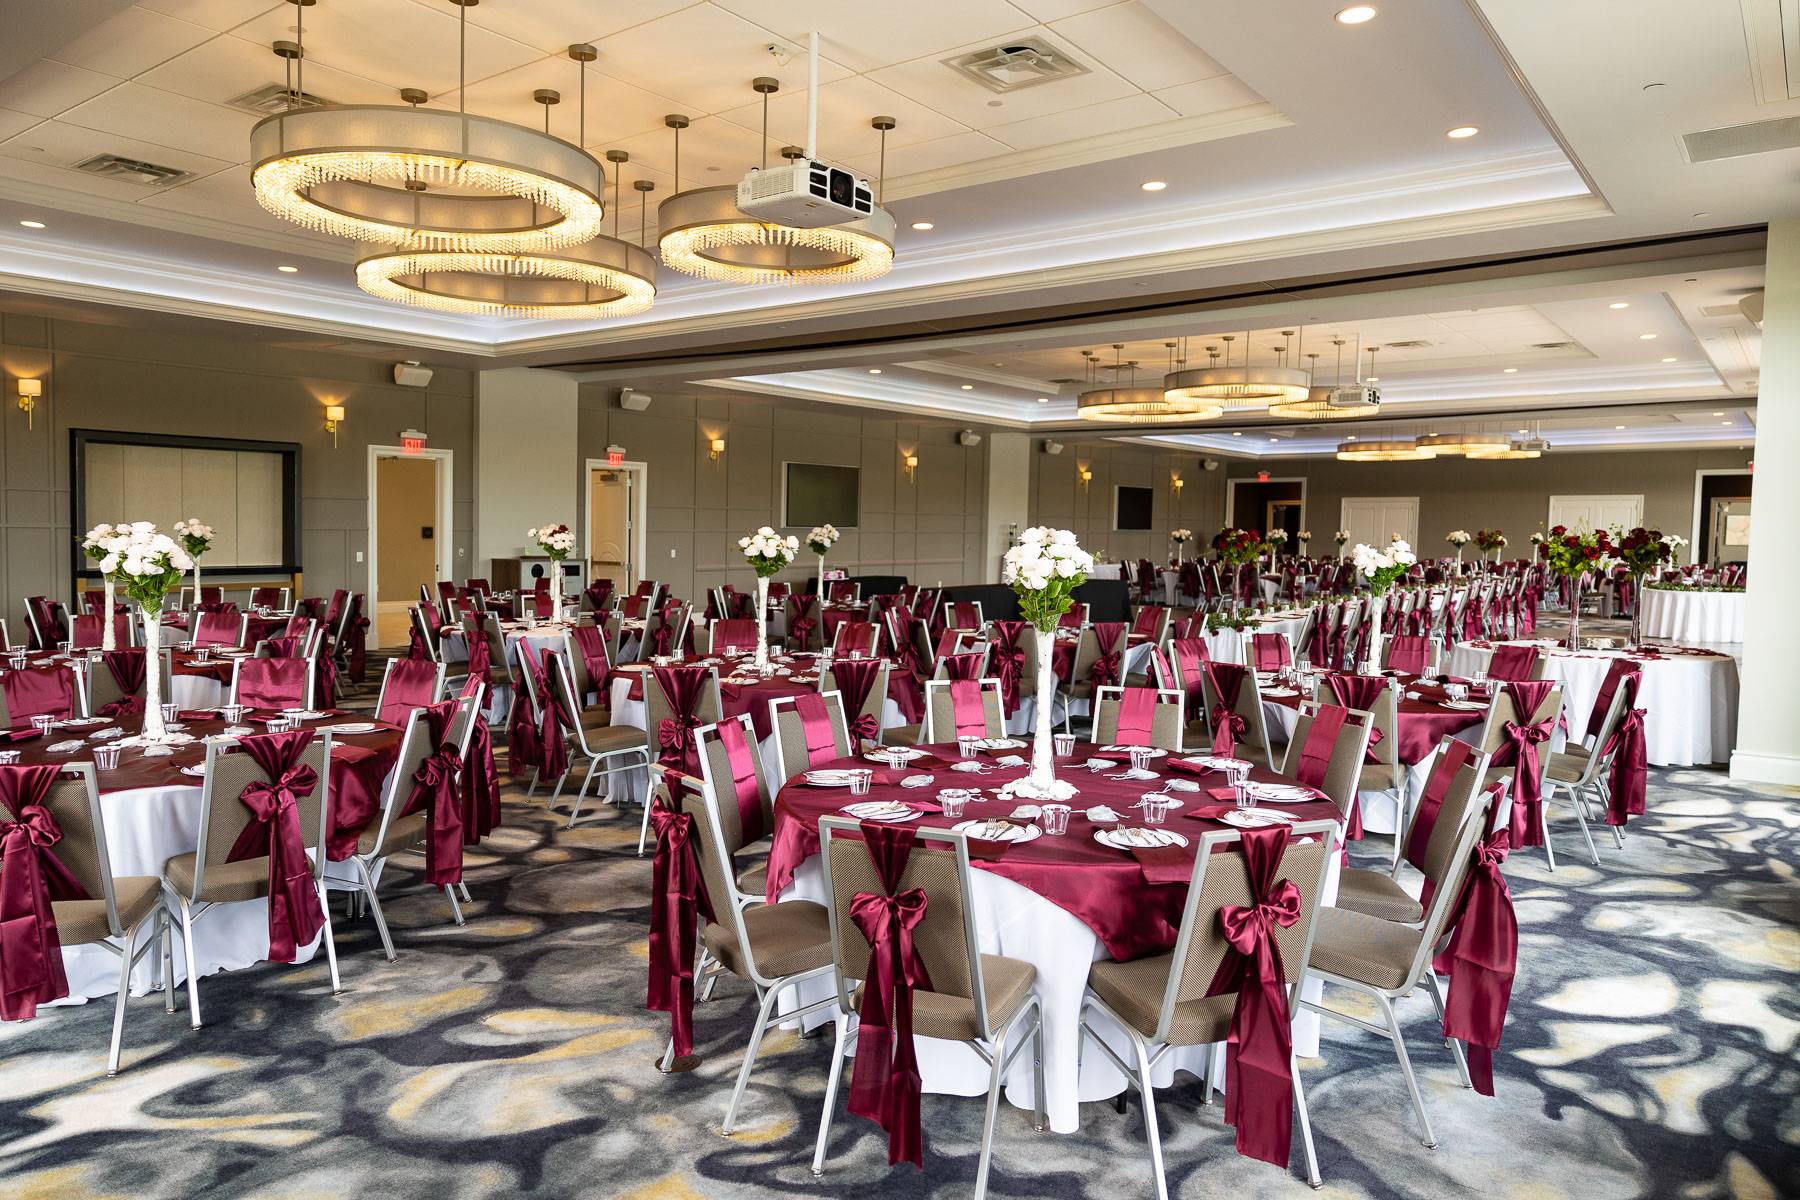 The wedding dining venue with red and white colors